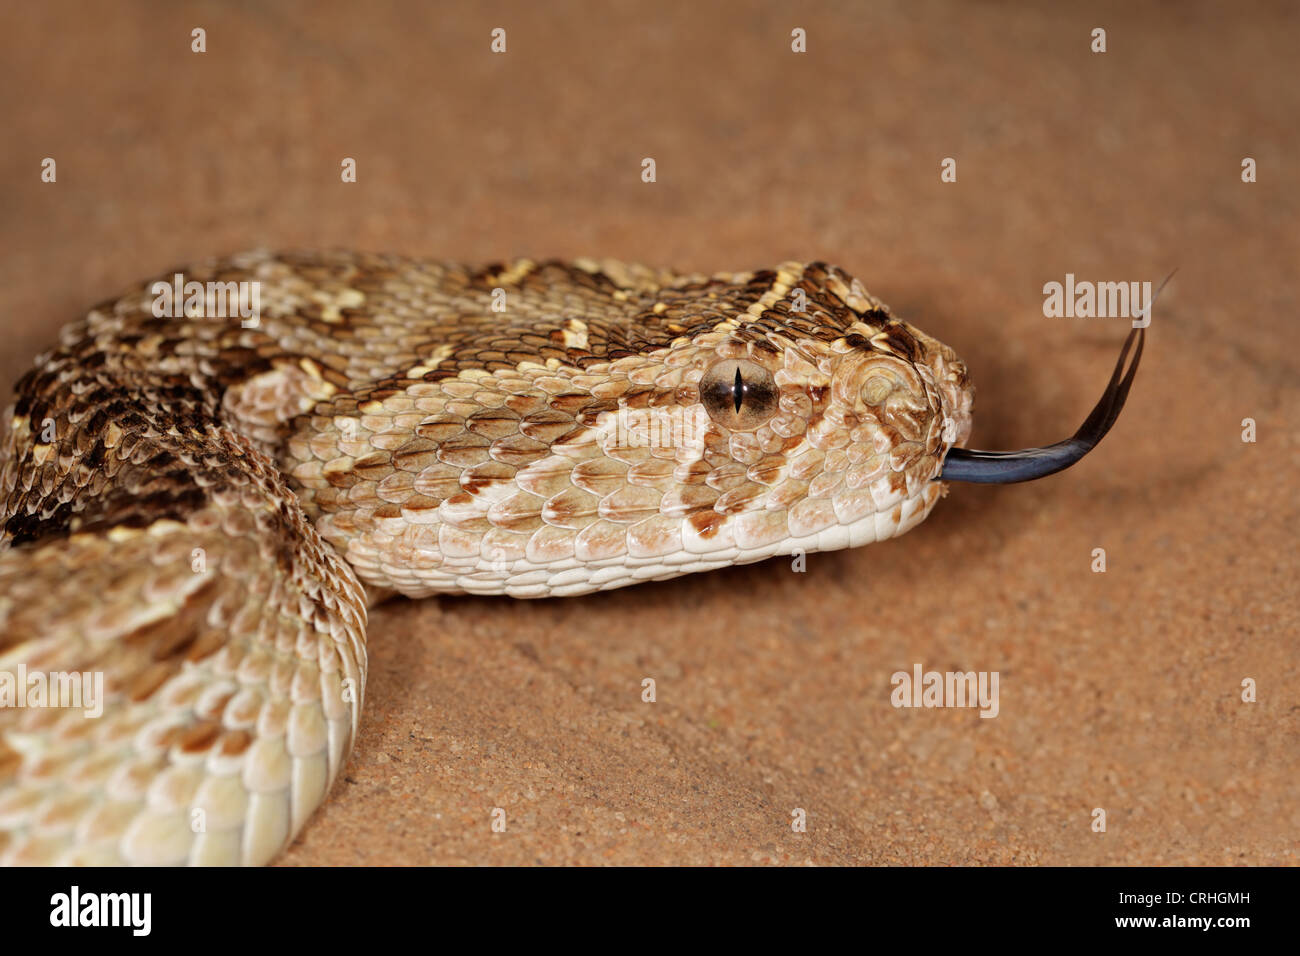 Close-up of a puff adder (Bitis arietans) snake with flicking tongue Stock Photo